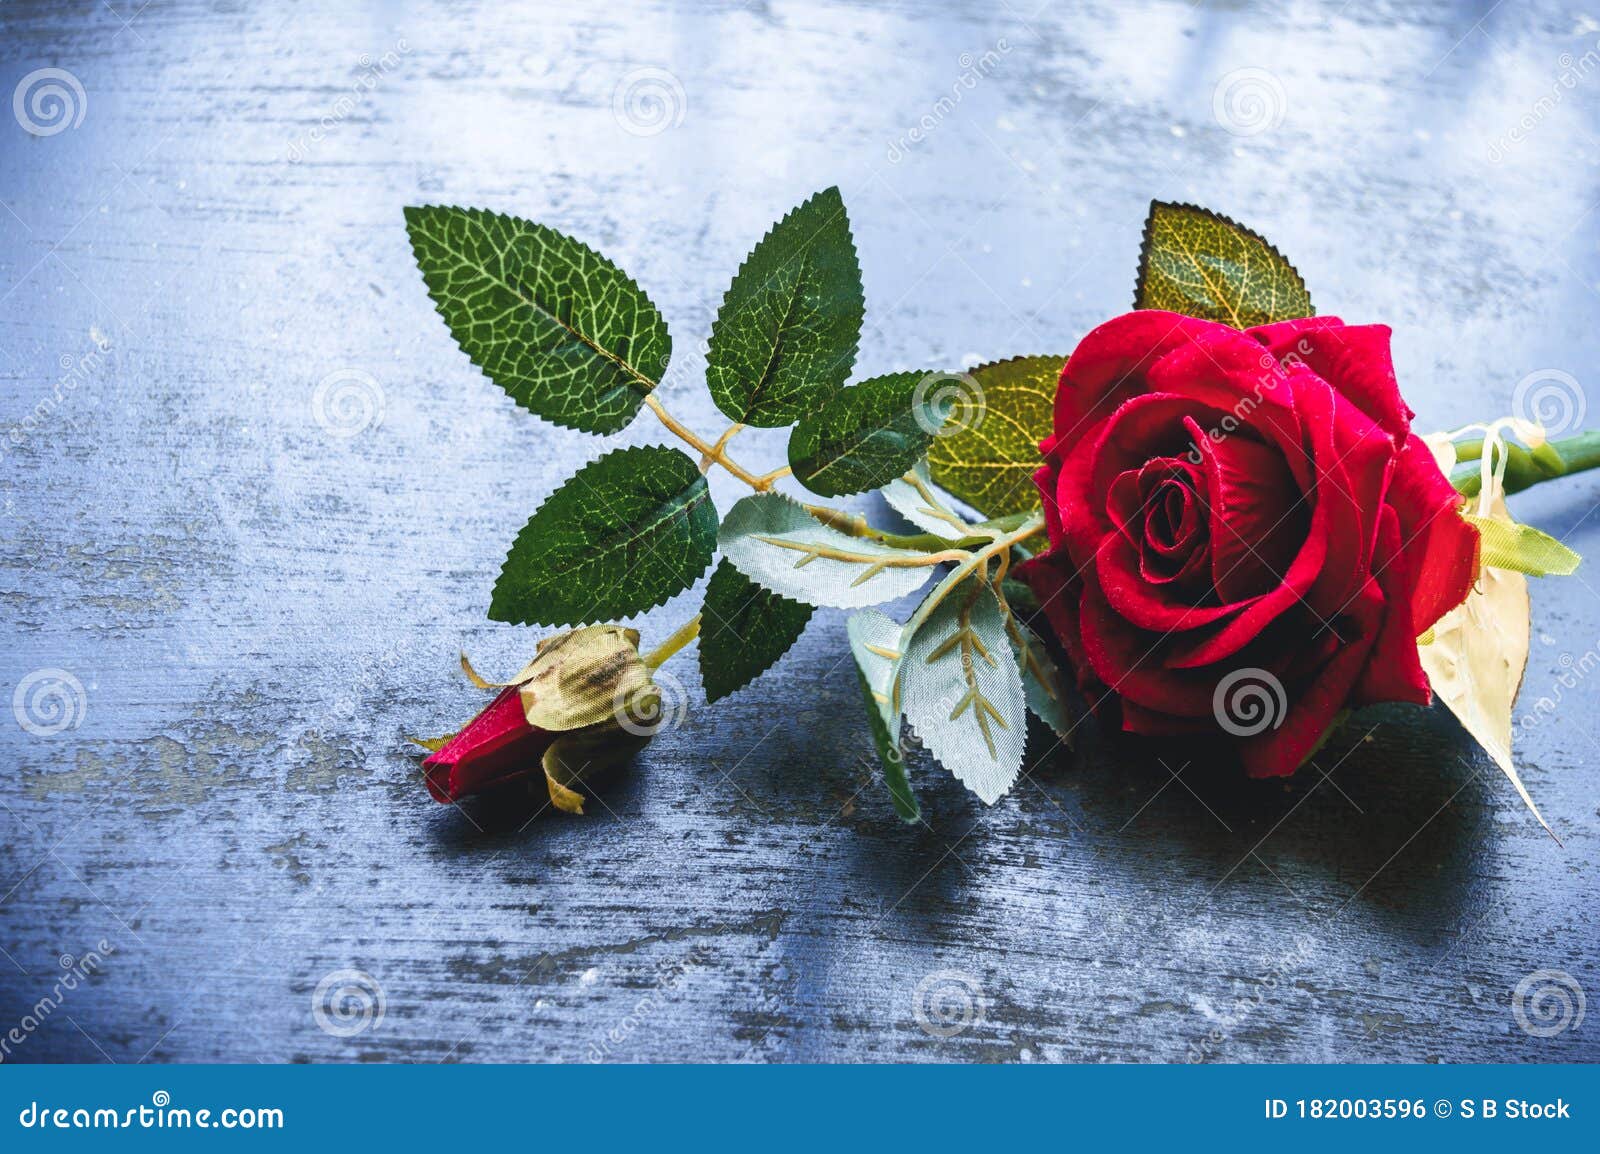 Red Rose Flower on Rustic Floor. Nature Still Life Love Romantic Background  Theme Stock Photo - Image of anniversary, flower: 182003596